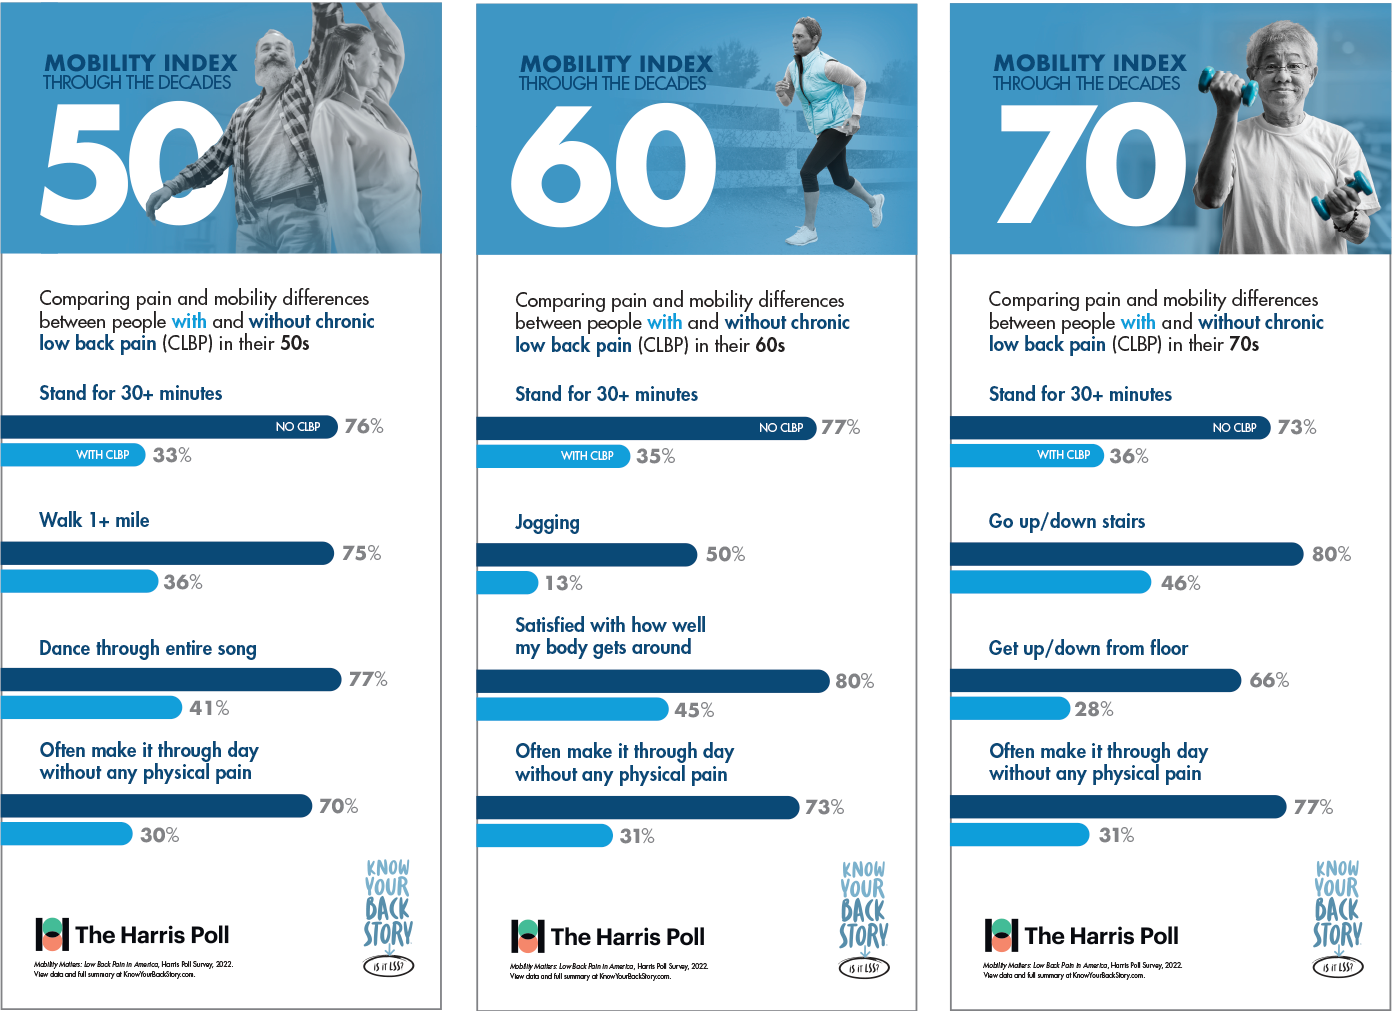 3 Infographics - Comparing pain and mobility differences between people with and without chronic low back pain (CLBP) in their 50s, 60s, and 70s. 50s: Stand for 30+ minutes: 76% without CLBP, 33% with CLBP. Walk 1+mile: 75% without CLBP, 36% with CLBP. Dance through entire song: 77% without CLBP, 41% with CLBP. Often make it through day without any physical pain: 70% without CLBP, 30% with CLBP. 60s: Stand for 30+ minutes: 77% without CLBP, 35% with CLBP. Jogging: 50% without CLBP, 13% with CLBP. Satisfied with how well my body gets around: 80% without CLBP, 45% with CLBP. Often make it through day without any physical pain: 73% without CLBP, 31% with CLBP. 70s: Stand for 30+ minutes: 73% without CLBP, 36% with CLBP. Go up and down stairs: 80% without CLBP, 46% with CLBP. Gt up and down from floor: 66% without CLBP, 28% with CLBP. Often make it through day without any physical pain: 77% without CLBP, 31% with CLBP. In conjunction with The Harris Poll and Know Your Back Story, Is it LSS?